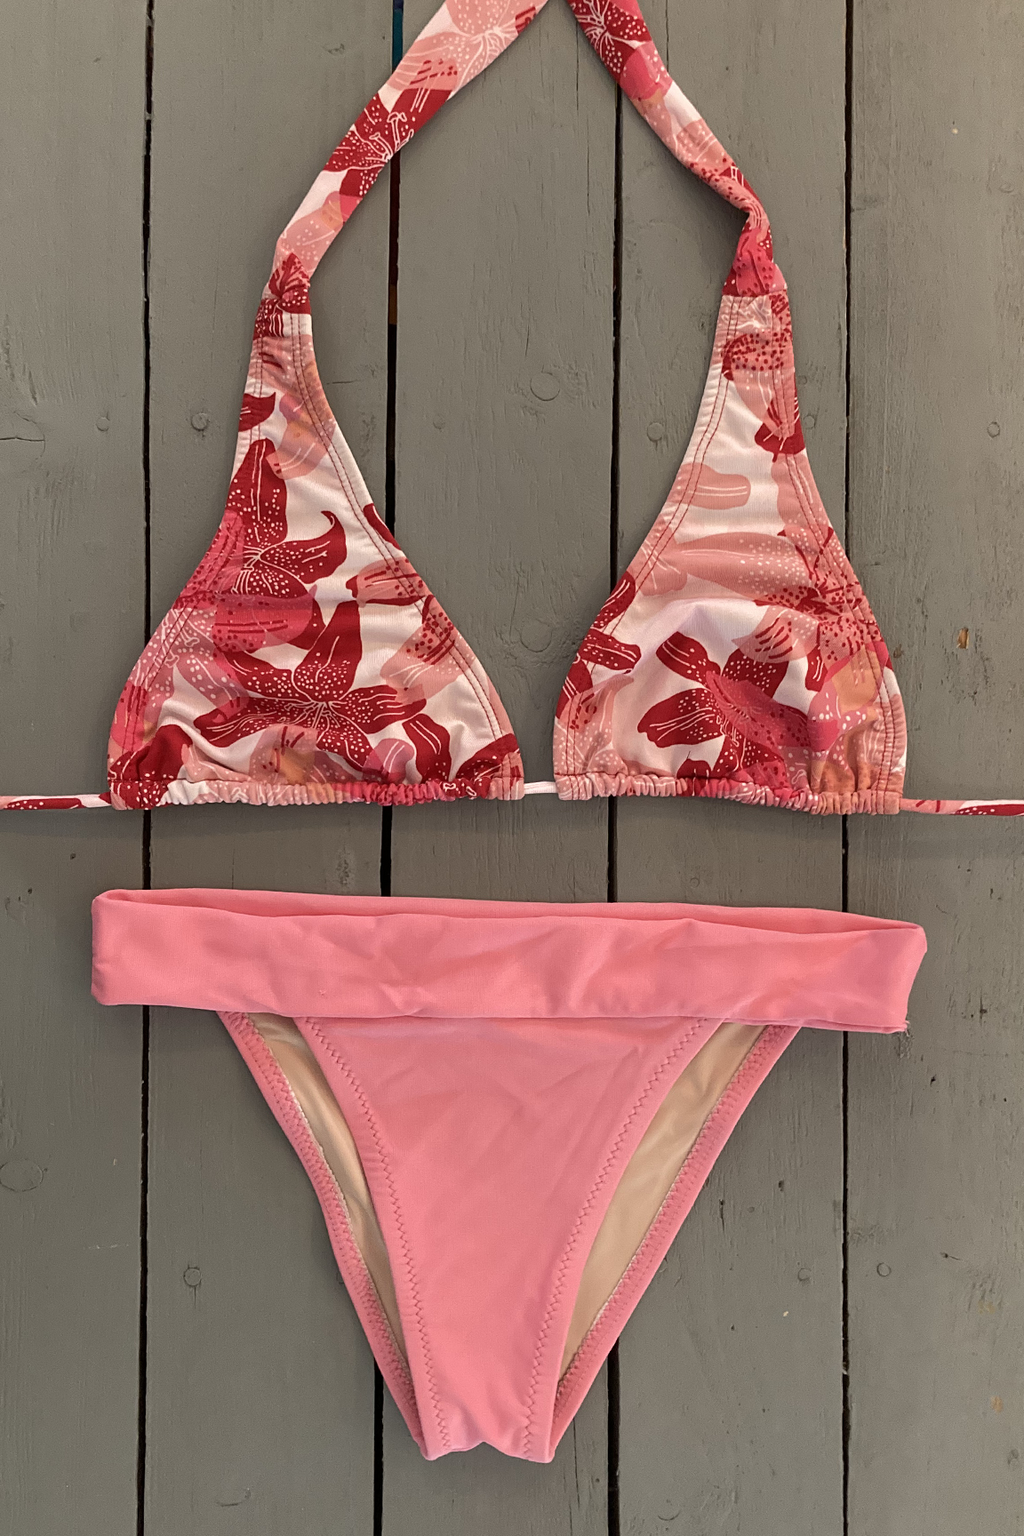 Upgrade your look with this pink floral halter bikini top. Made with the finest quality of soft and stretchy Lycra to achieve the best fit. Order yours today. @jillesbikinis  